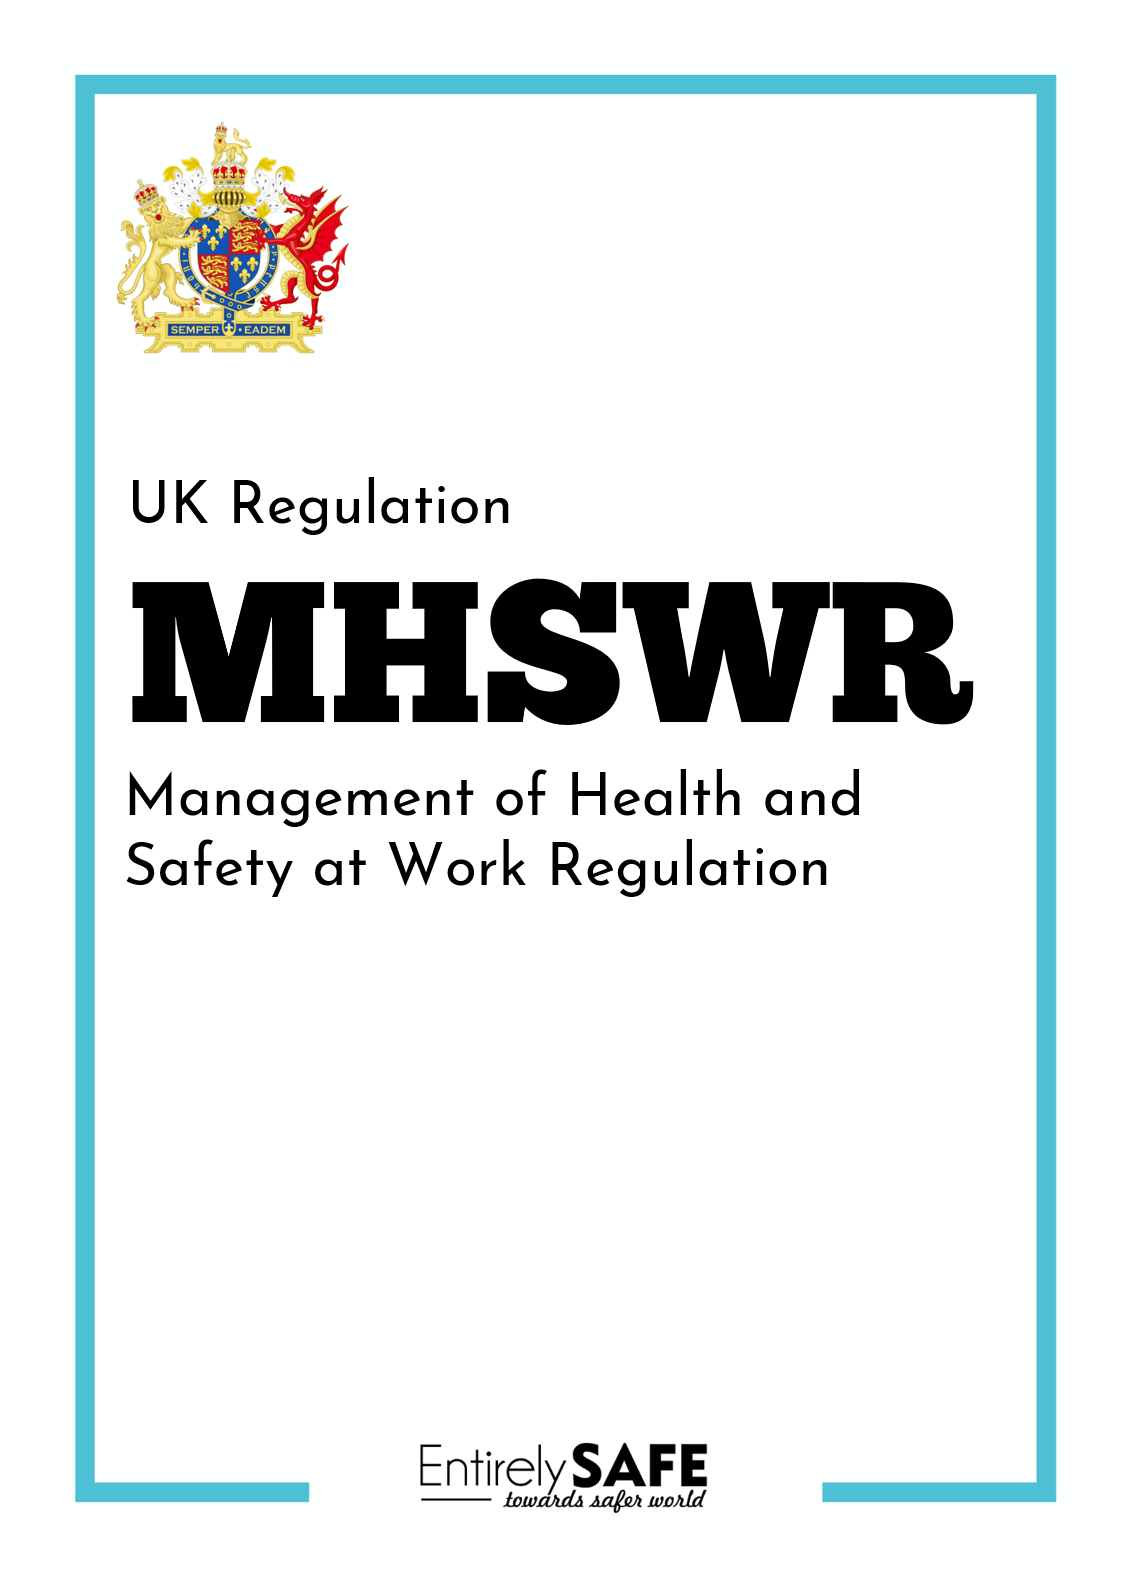 162-Management of Health and Safety at Work Regulations - MHSWR